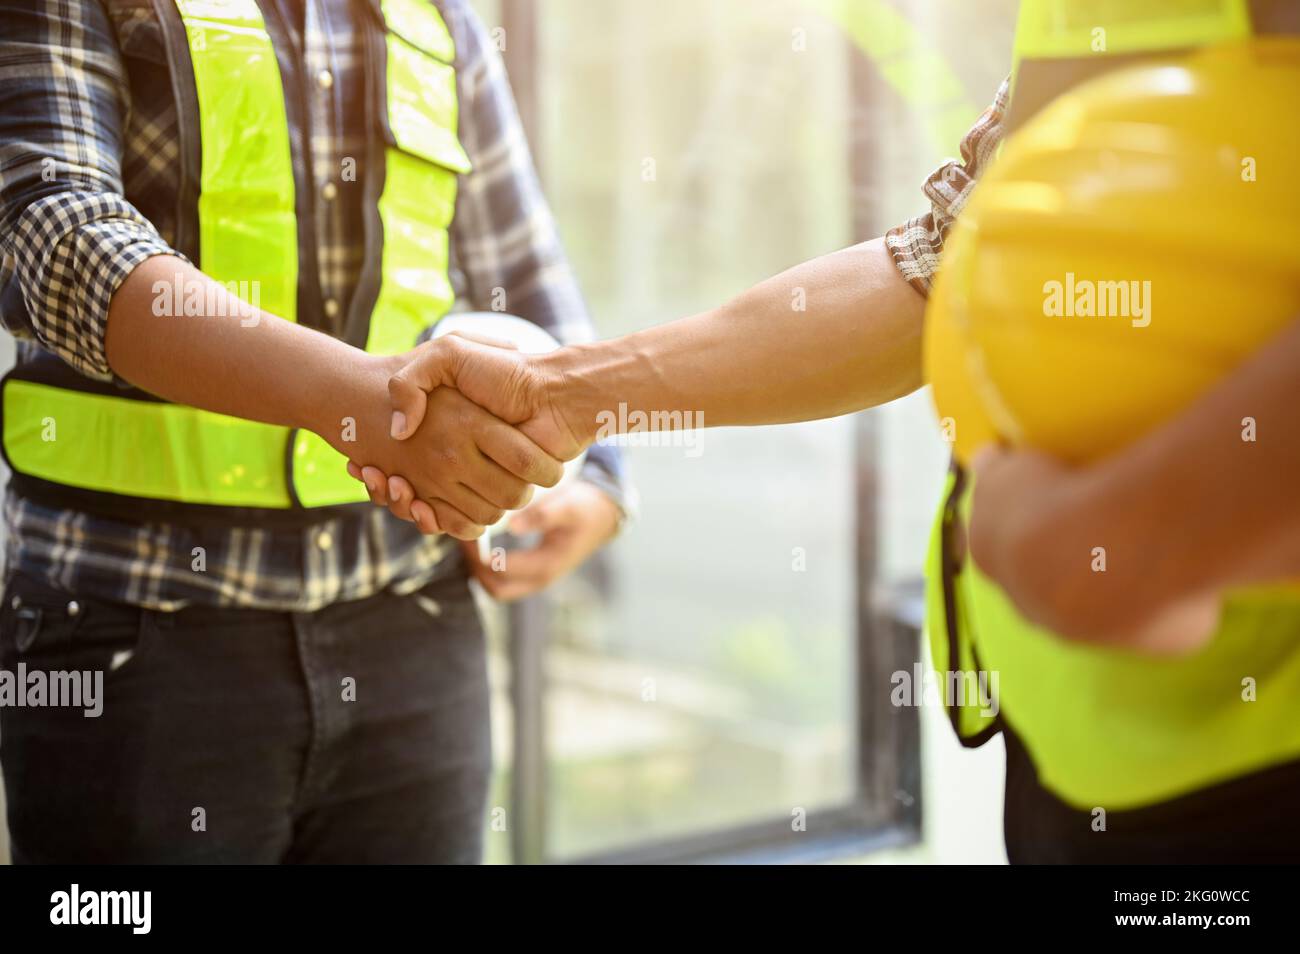 Professional and successful construction engineer or worker shaking hands with his coworker. close-up and cropped image Stock Photo